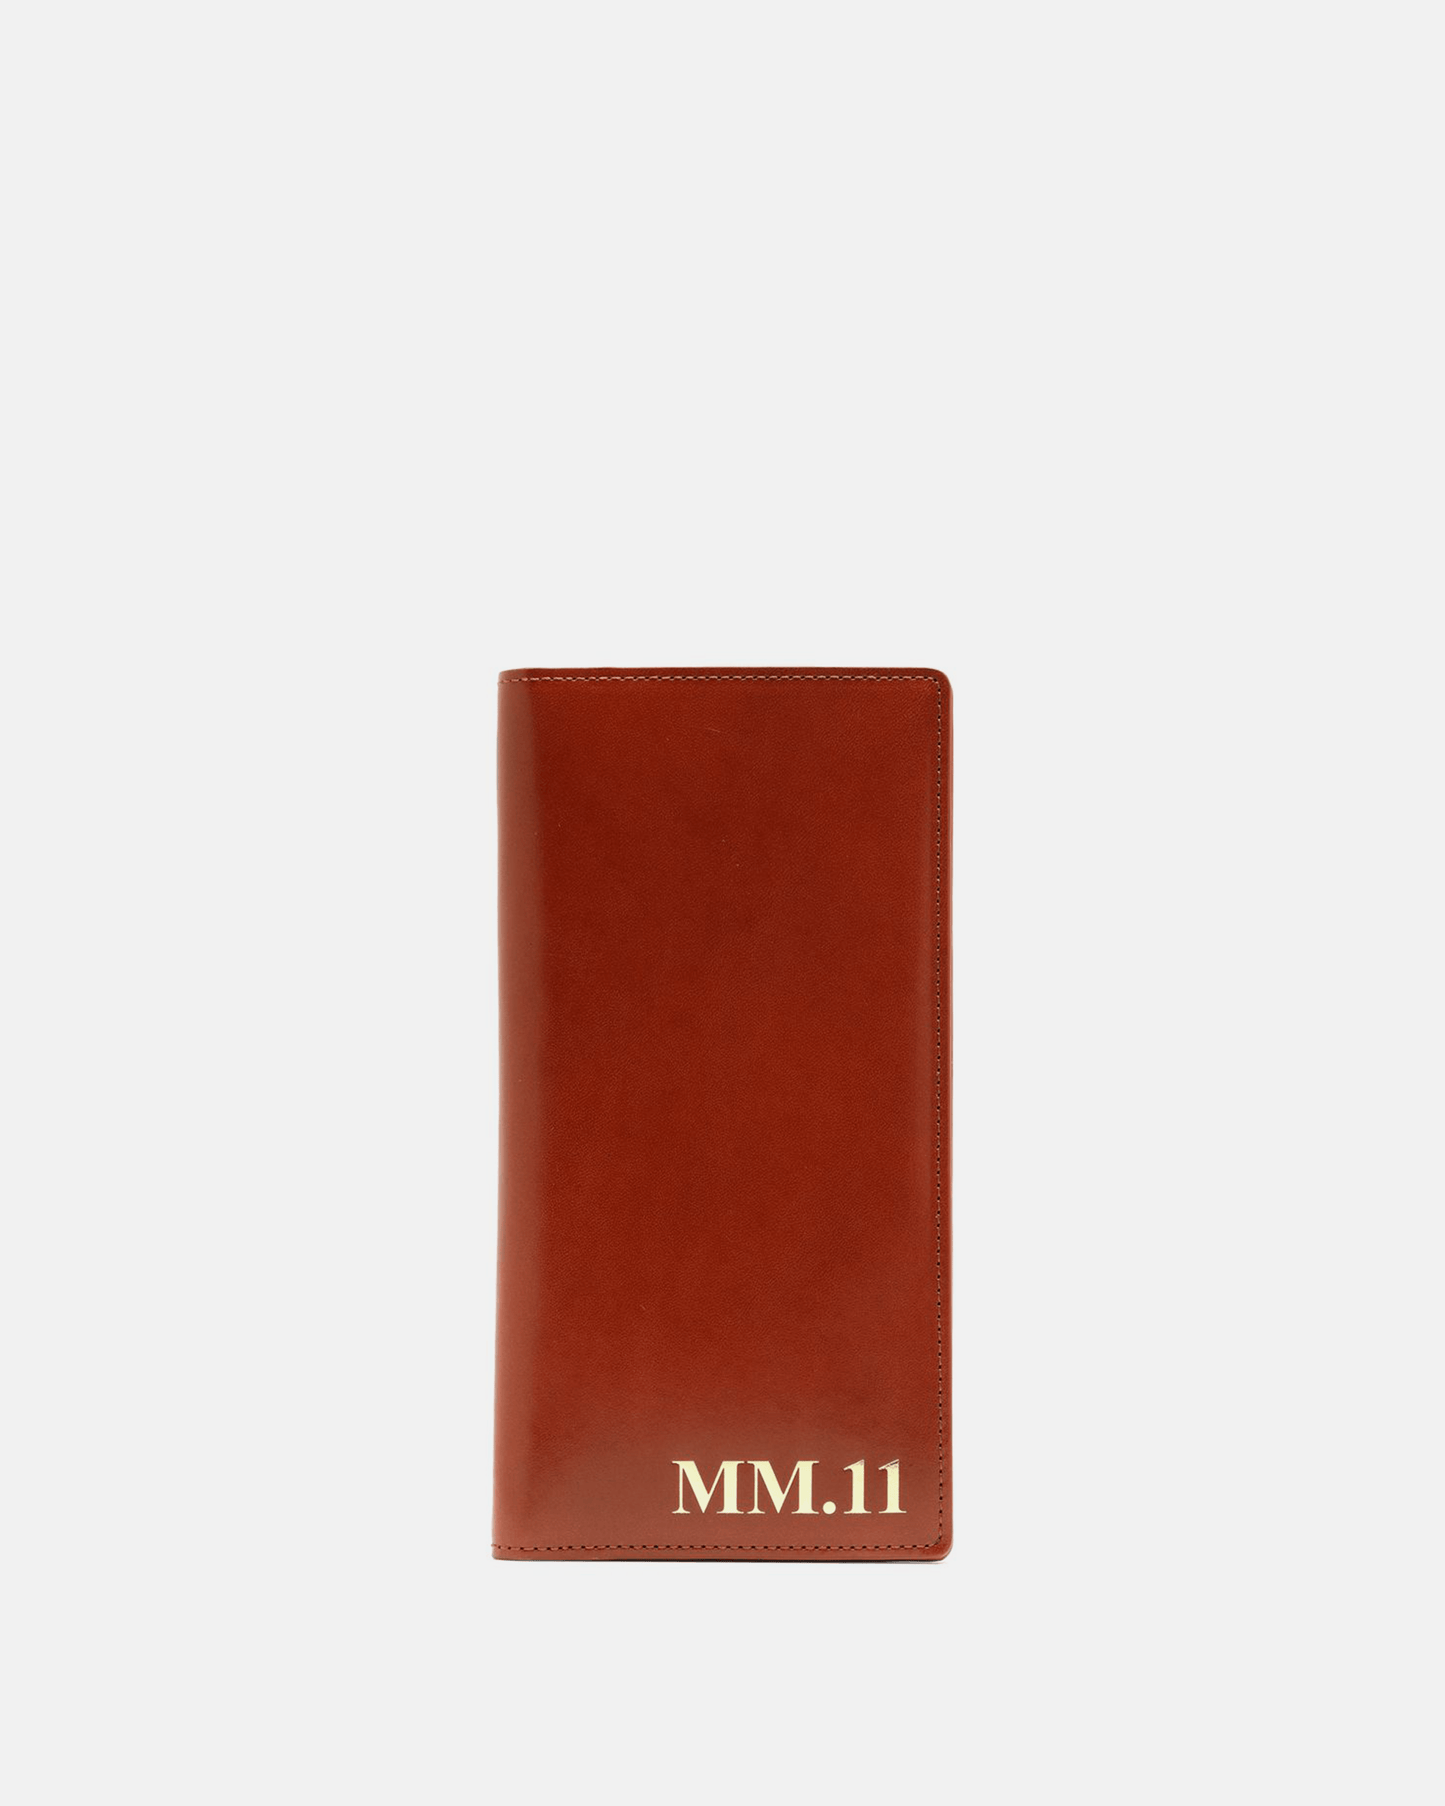 Maison Margiela Leather Goods MM.11 Travel Wallet in Brown